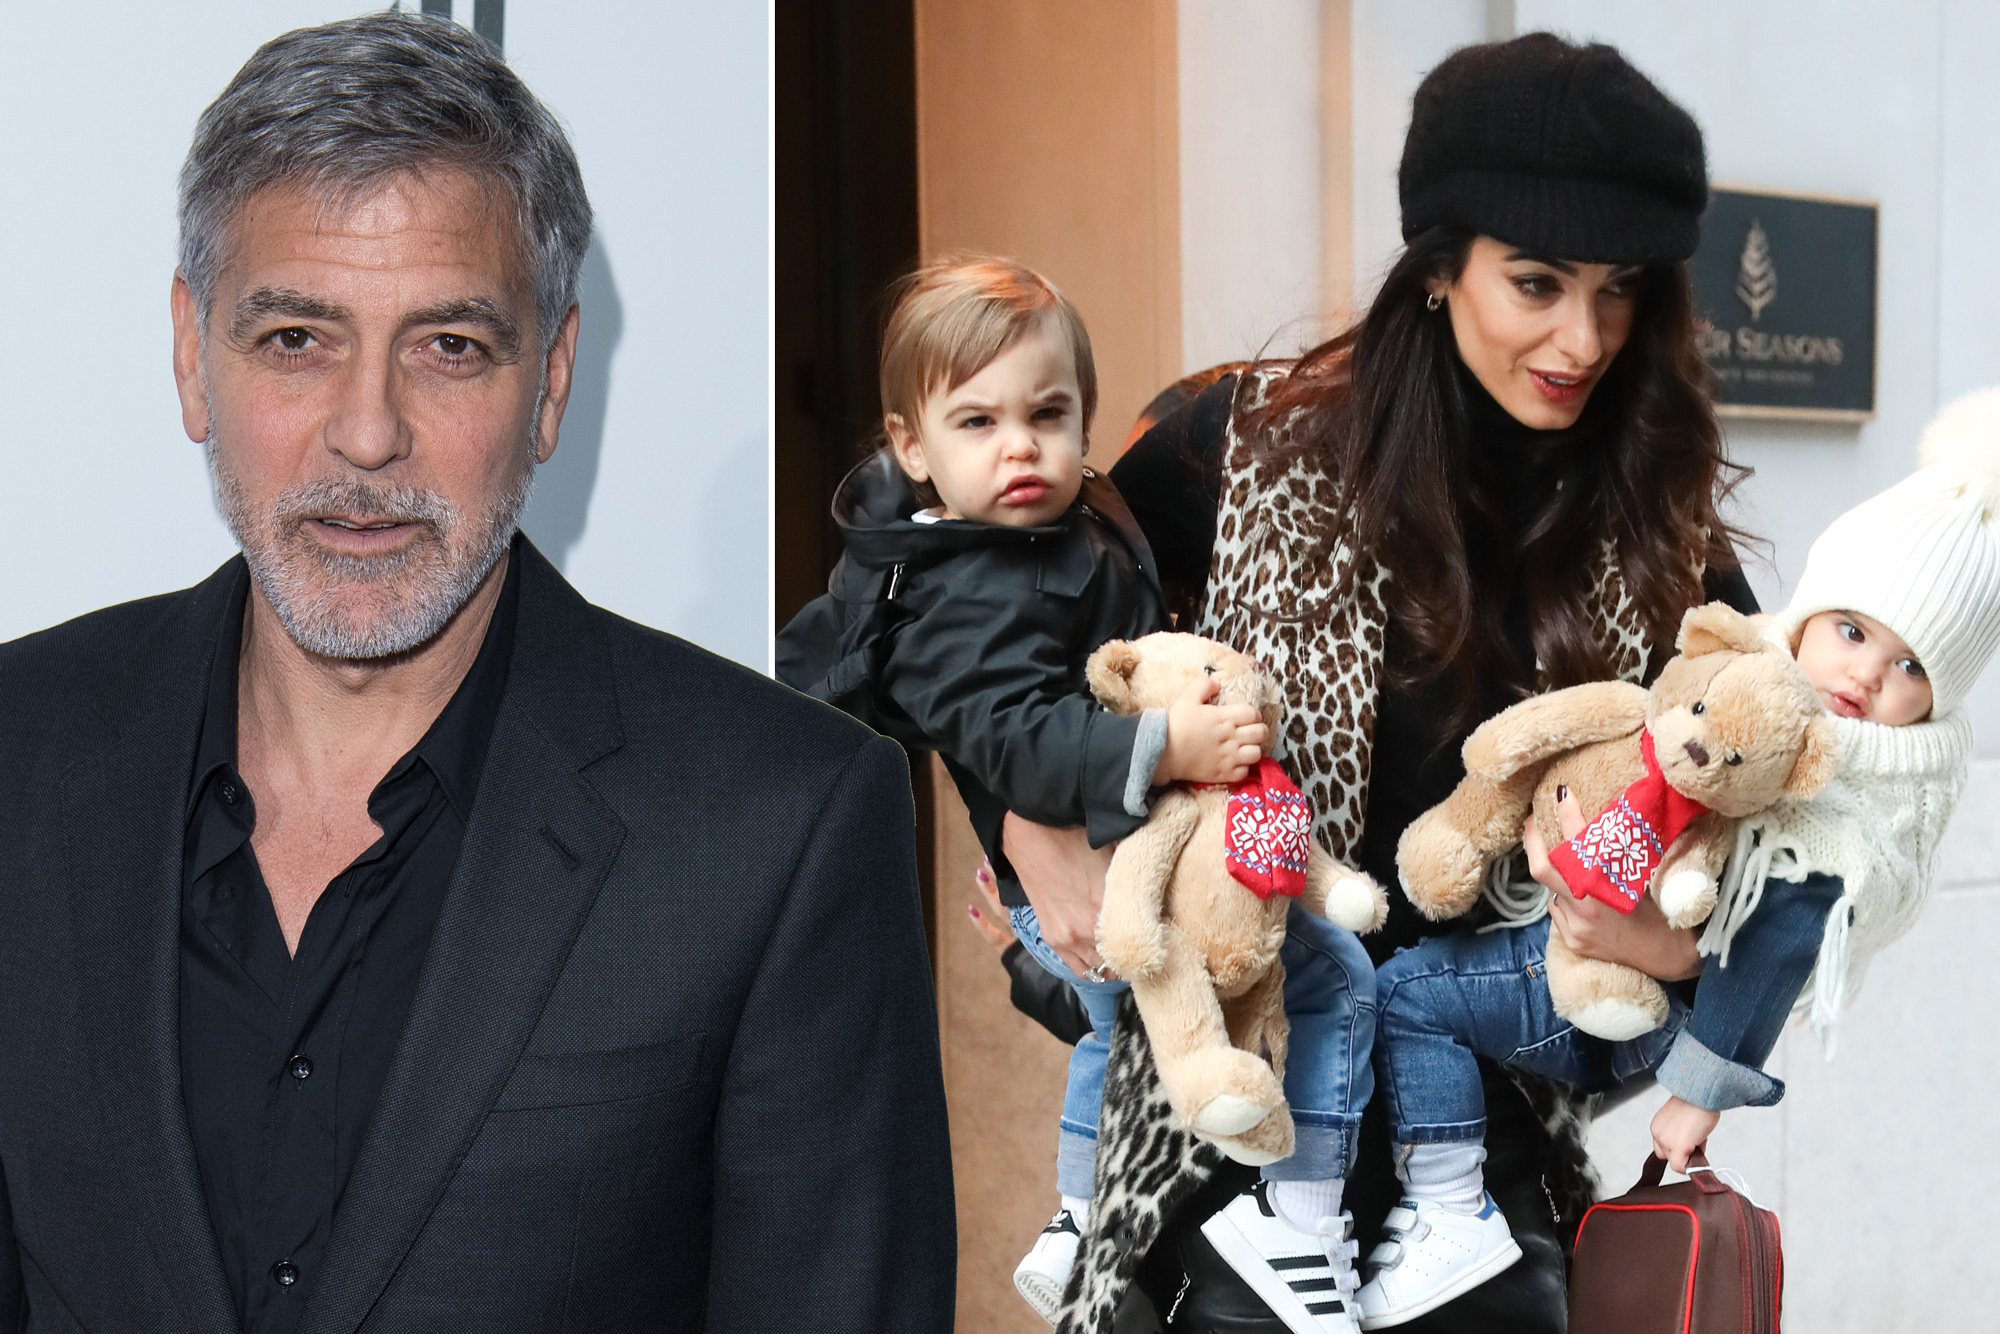 Clooney worried for kids' safety as Amal works on ISIS case